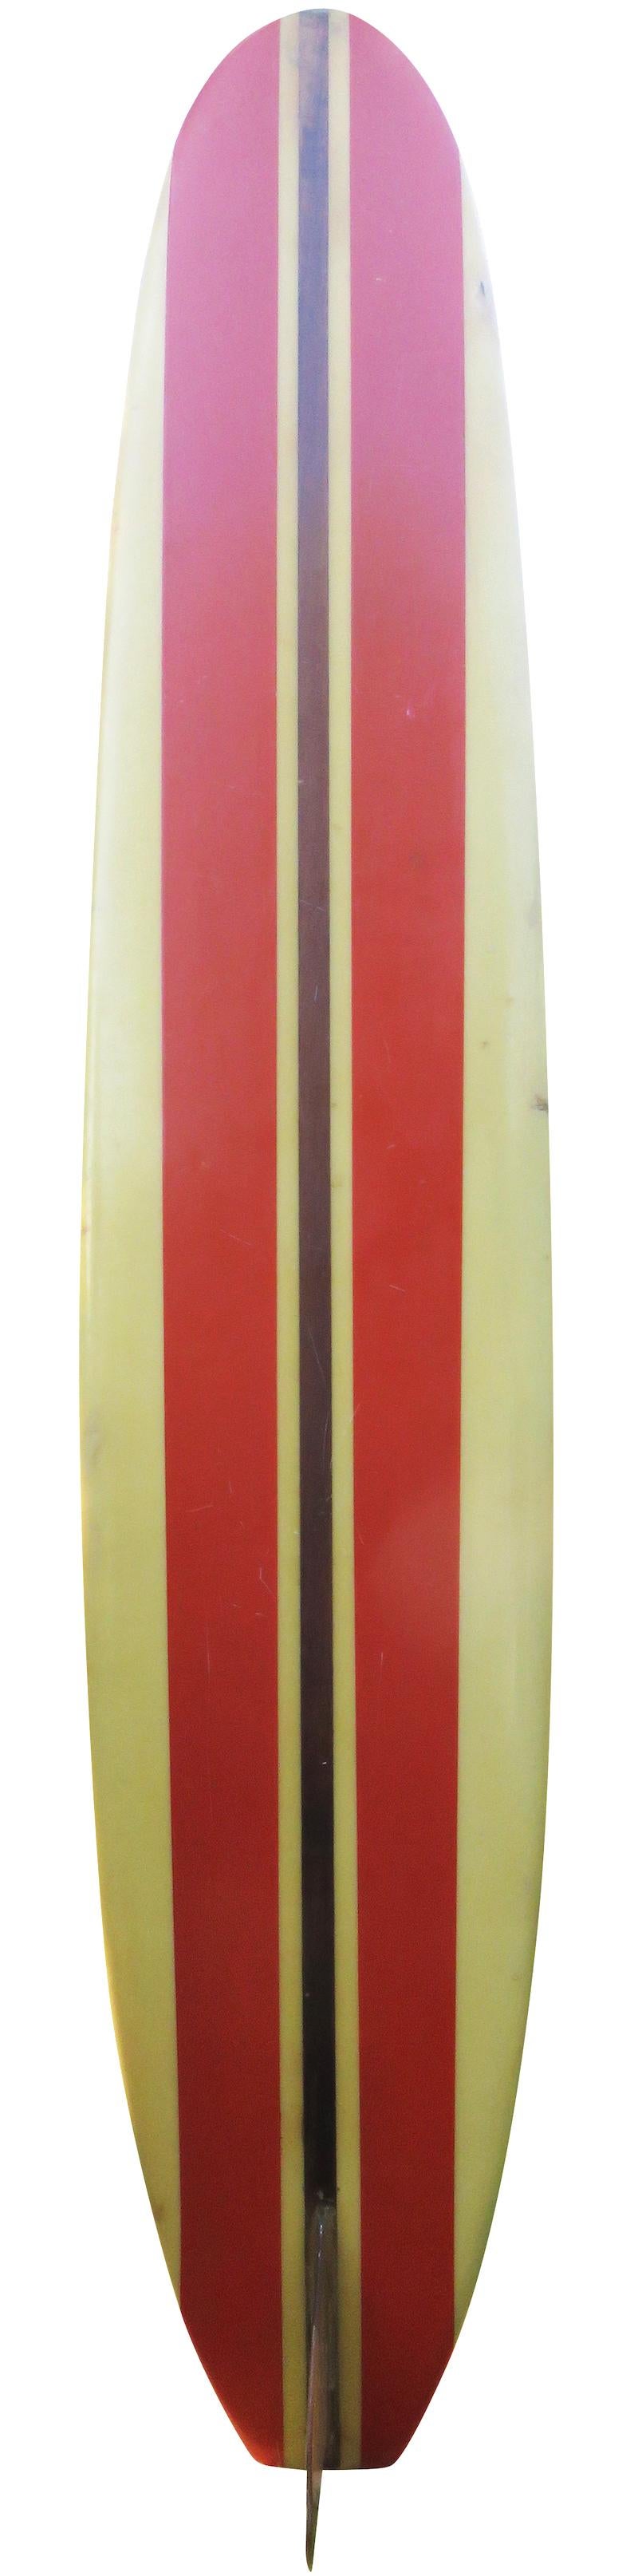 Mid-1960s vintage ten toes longboard surfboard. Features a single redwood stringer design with classic red paneling. A great example of a classic longboard made in the 1960s. Use as a rideable vintage longboard or decorative surfboard work of art!